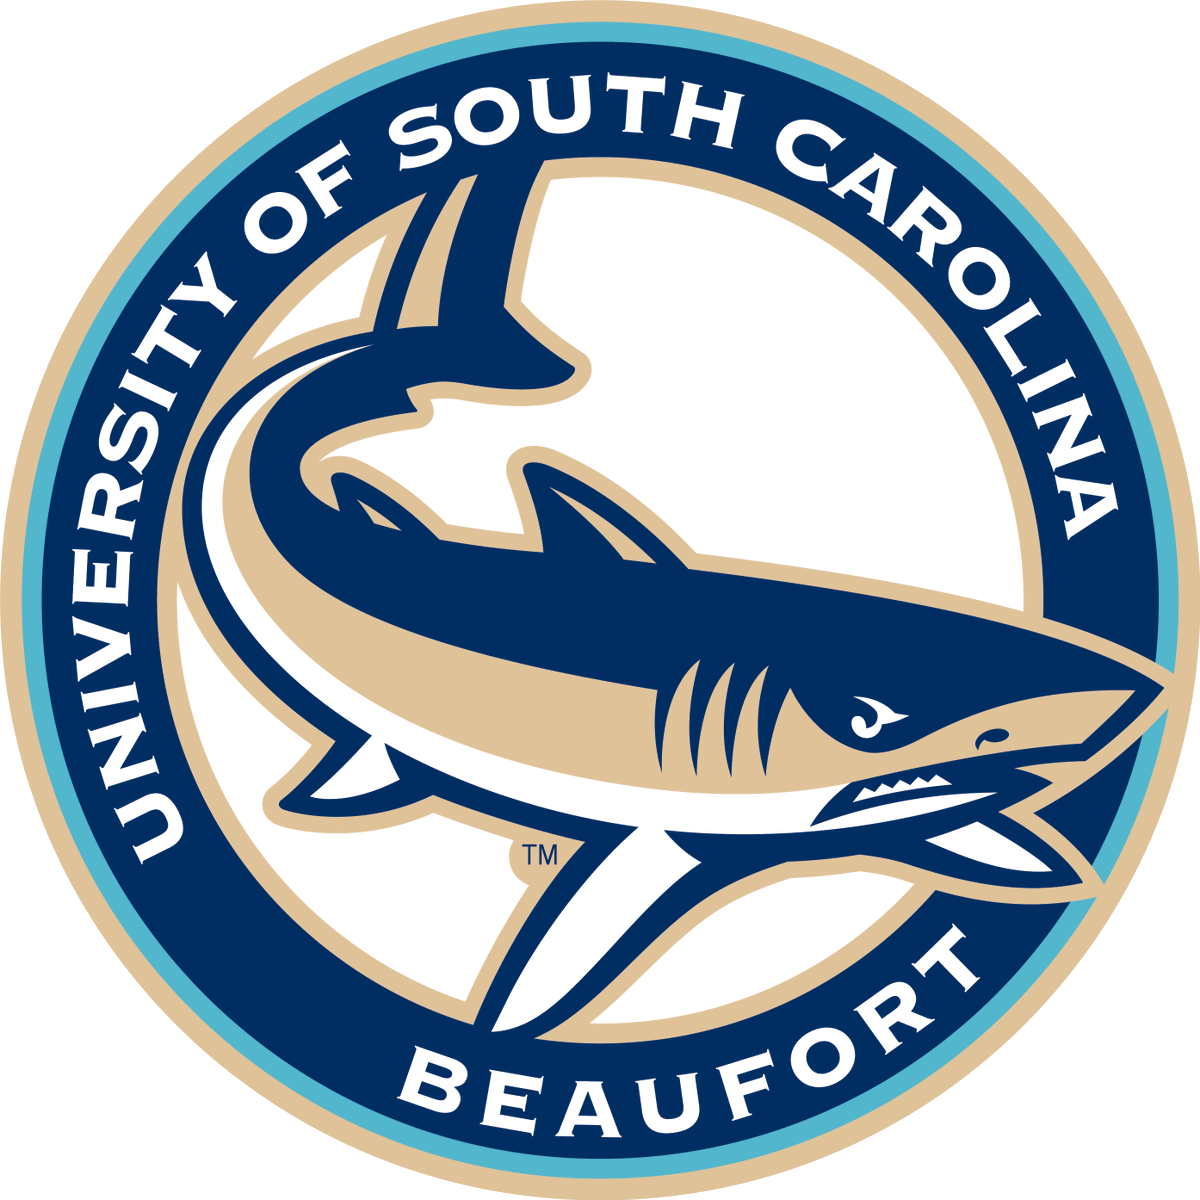 If you are working towards a *Master's* degree and want to showcase your research to undergraduates in the Marine Biology Program at @USCBeaufort, please DM me. Looking for a 5-10 minute online presentation w/ Q&A. Tuesdays at 4:30pm EST. Jan 16 - April 16. Thx!